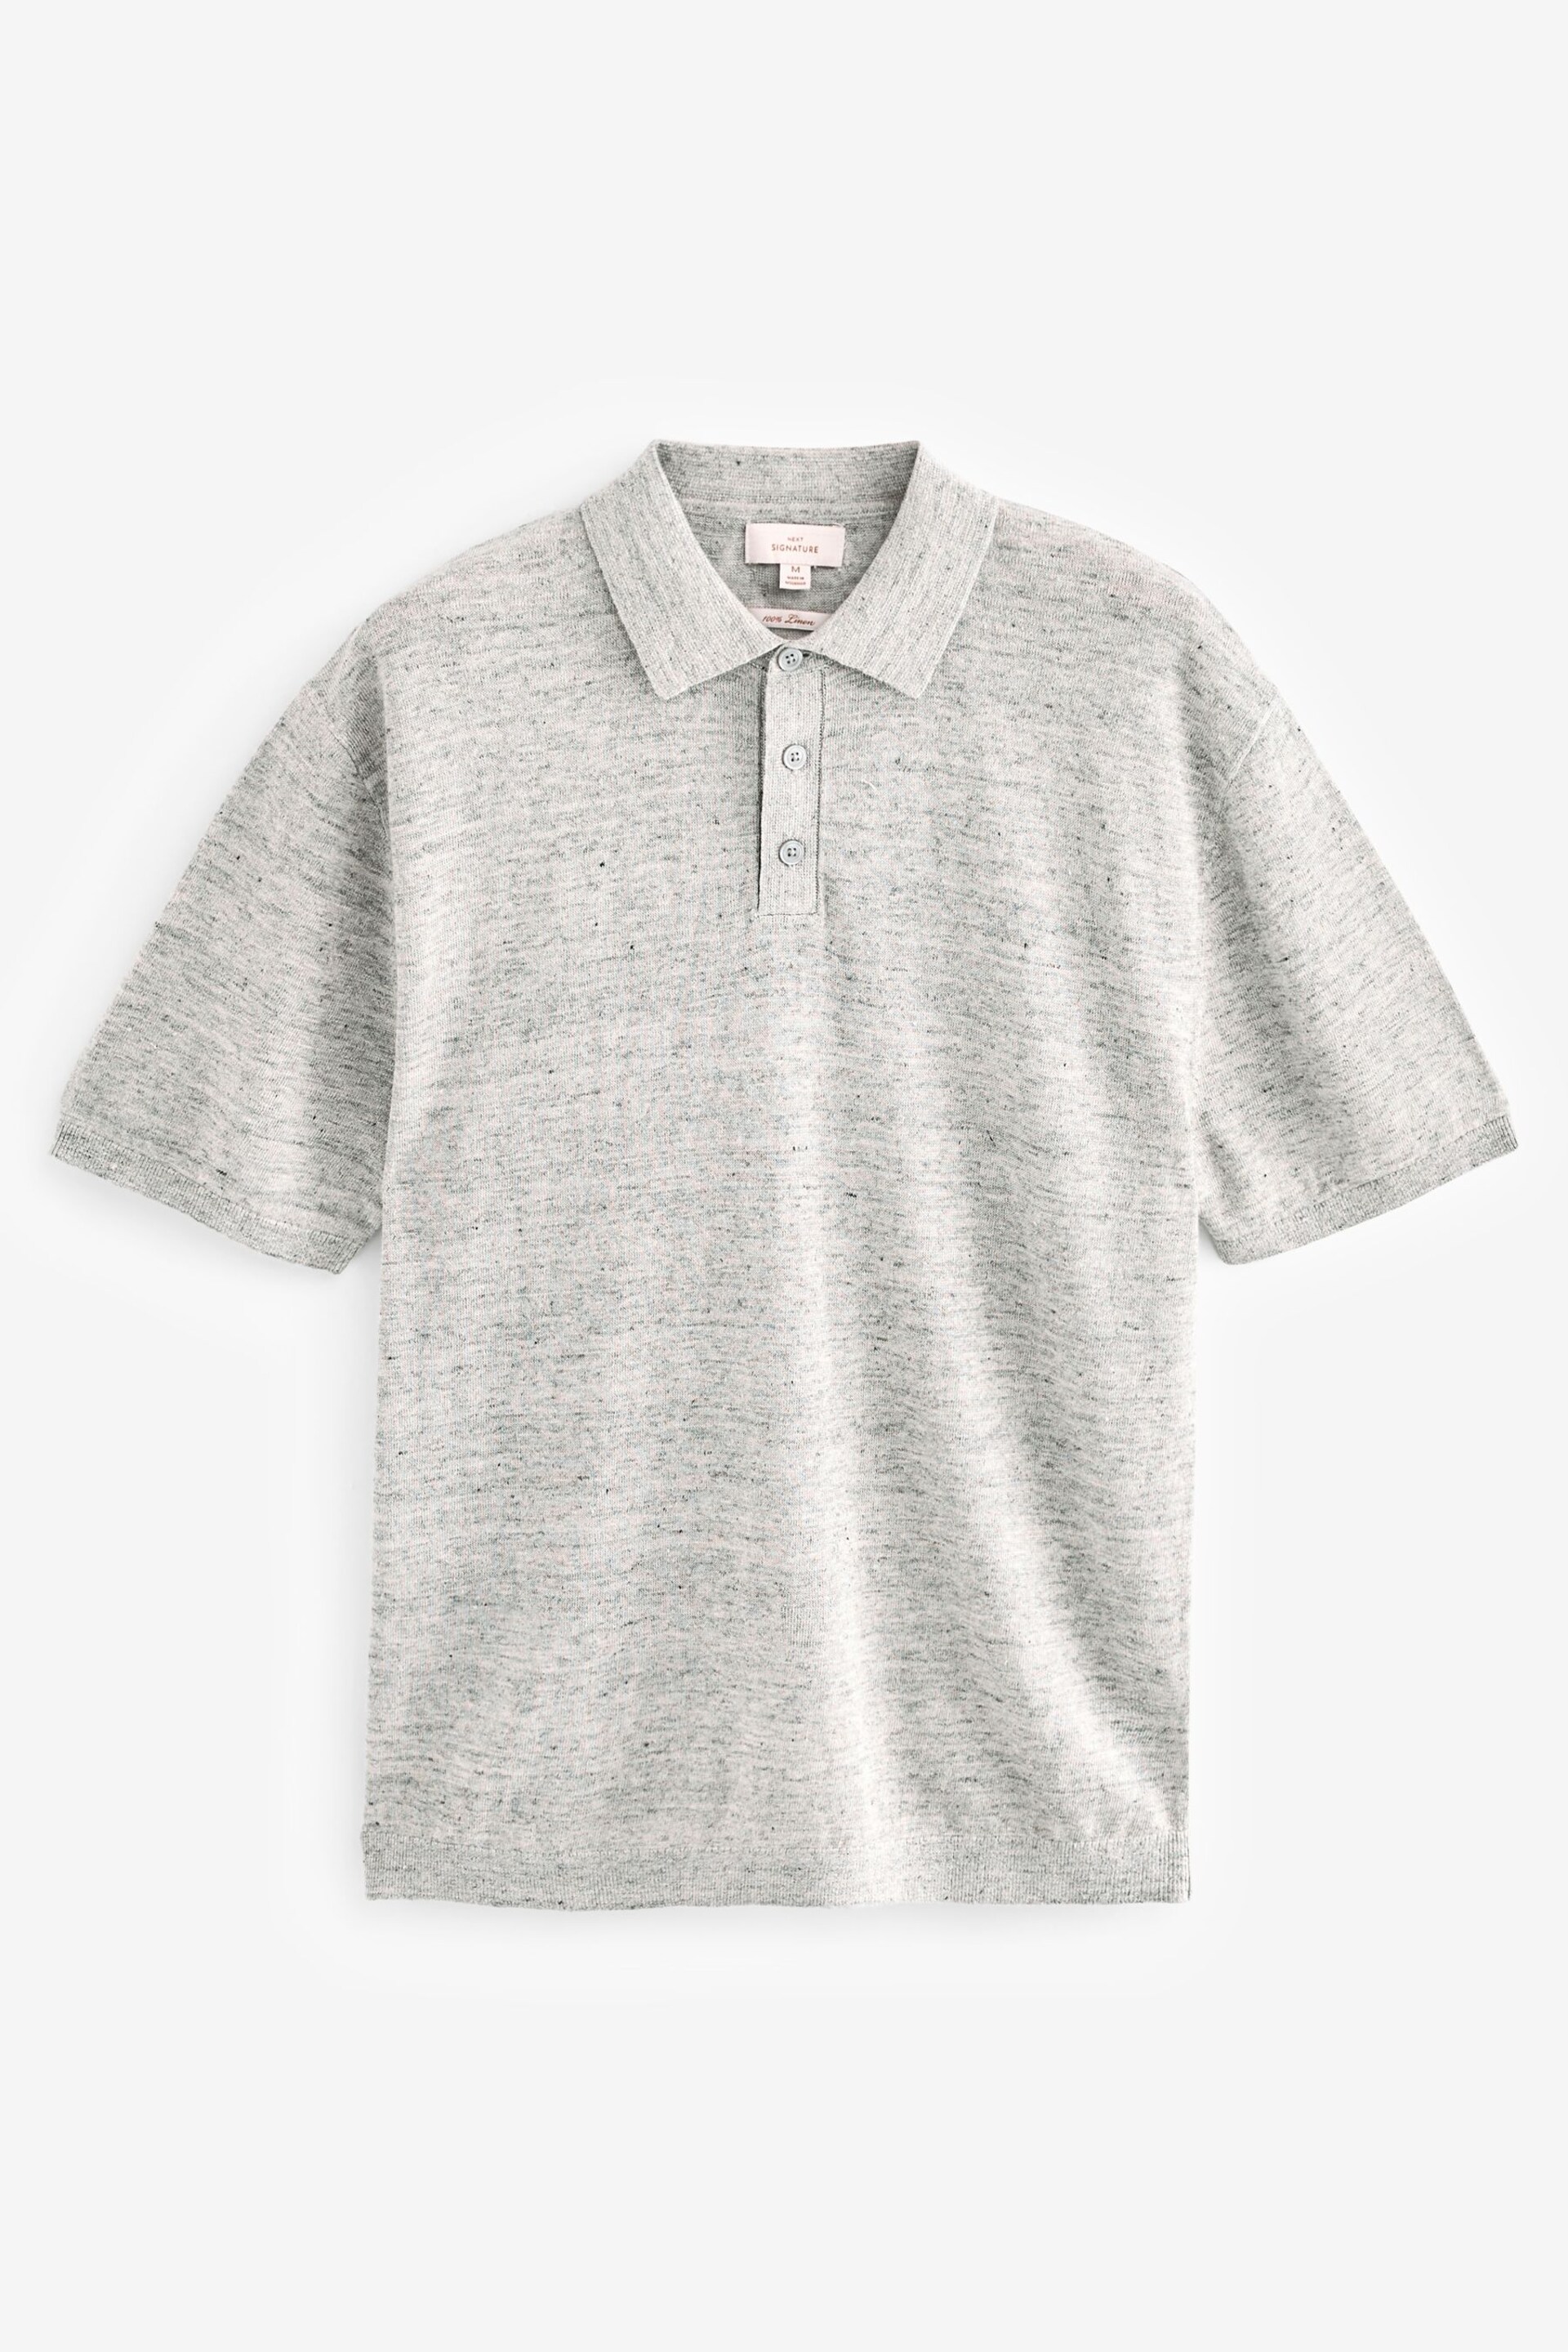 Grey Linen Blend Knitted Polo Shirt - Image 5 of 7